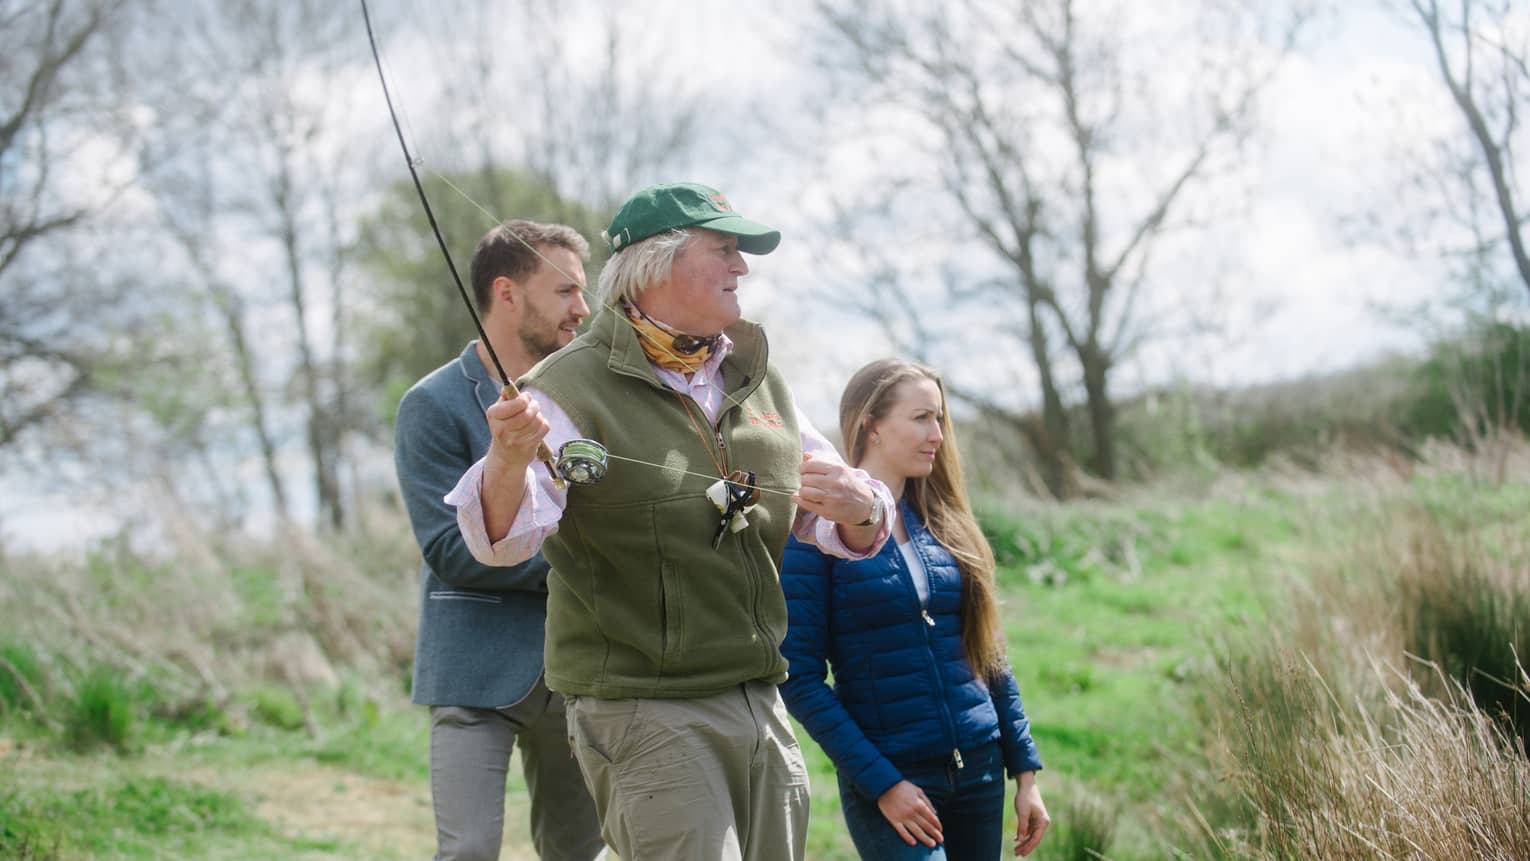 An older man and a man and woman fishing outside surrounded by thin trees and tall grass.